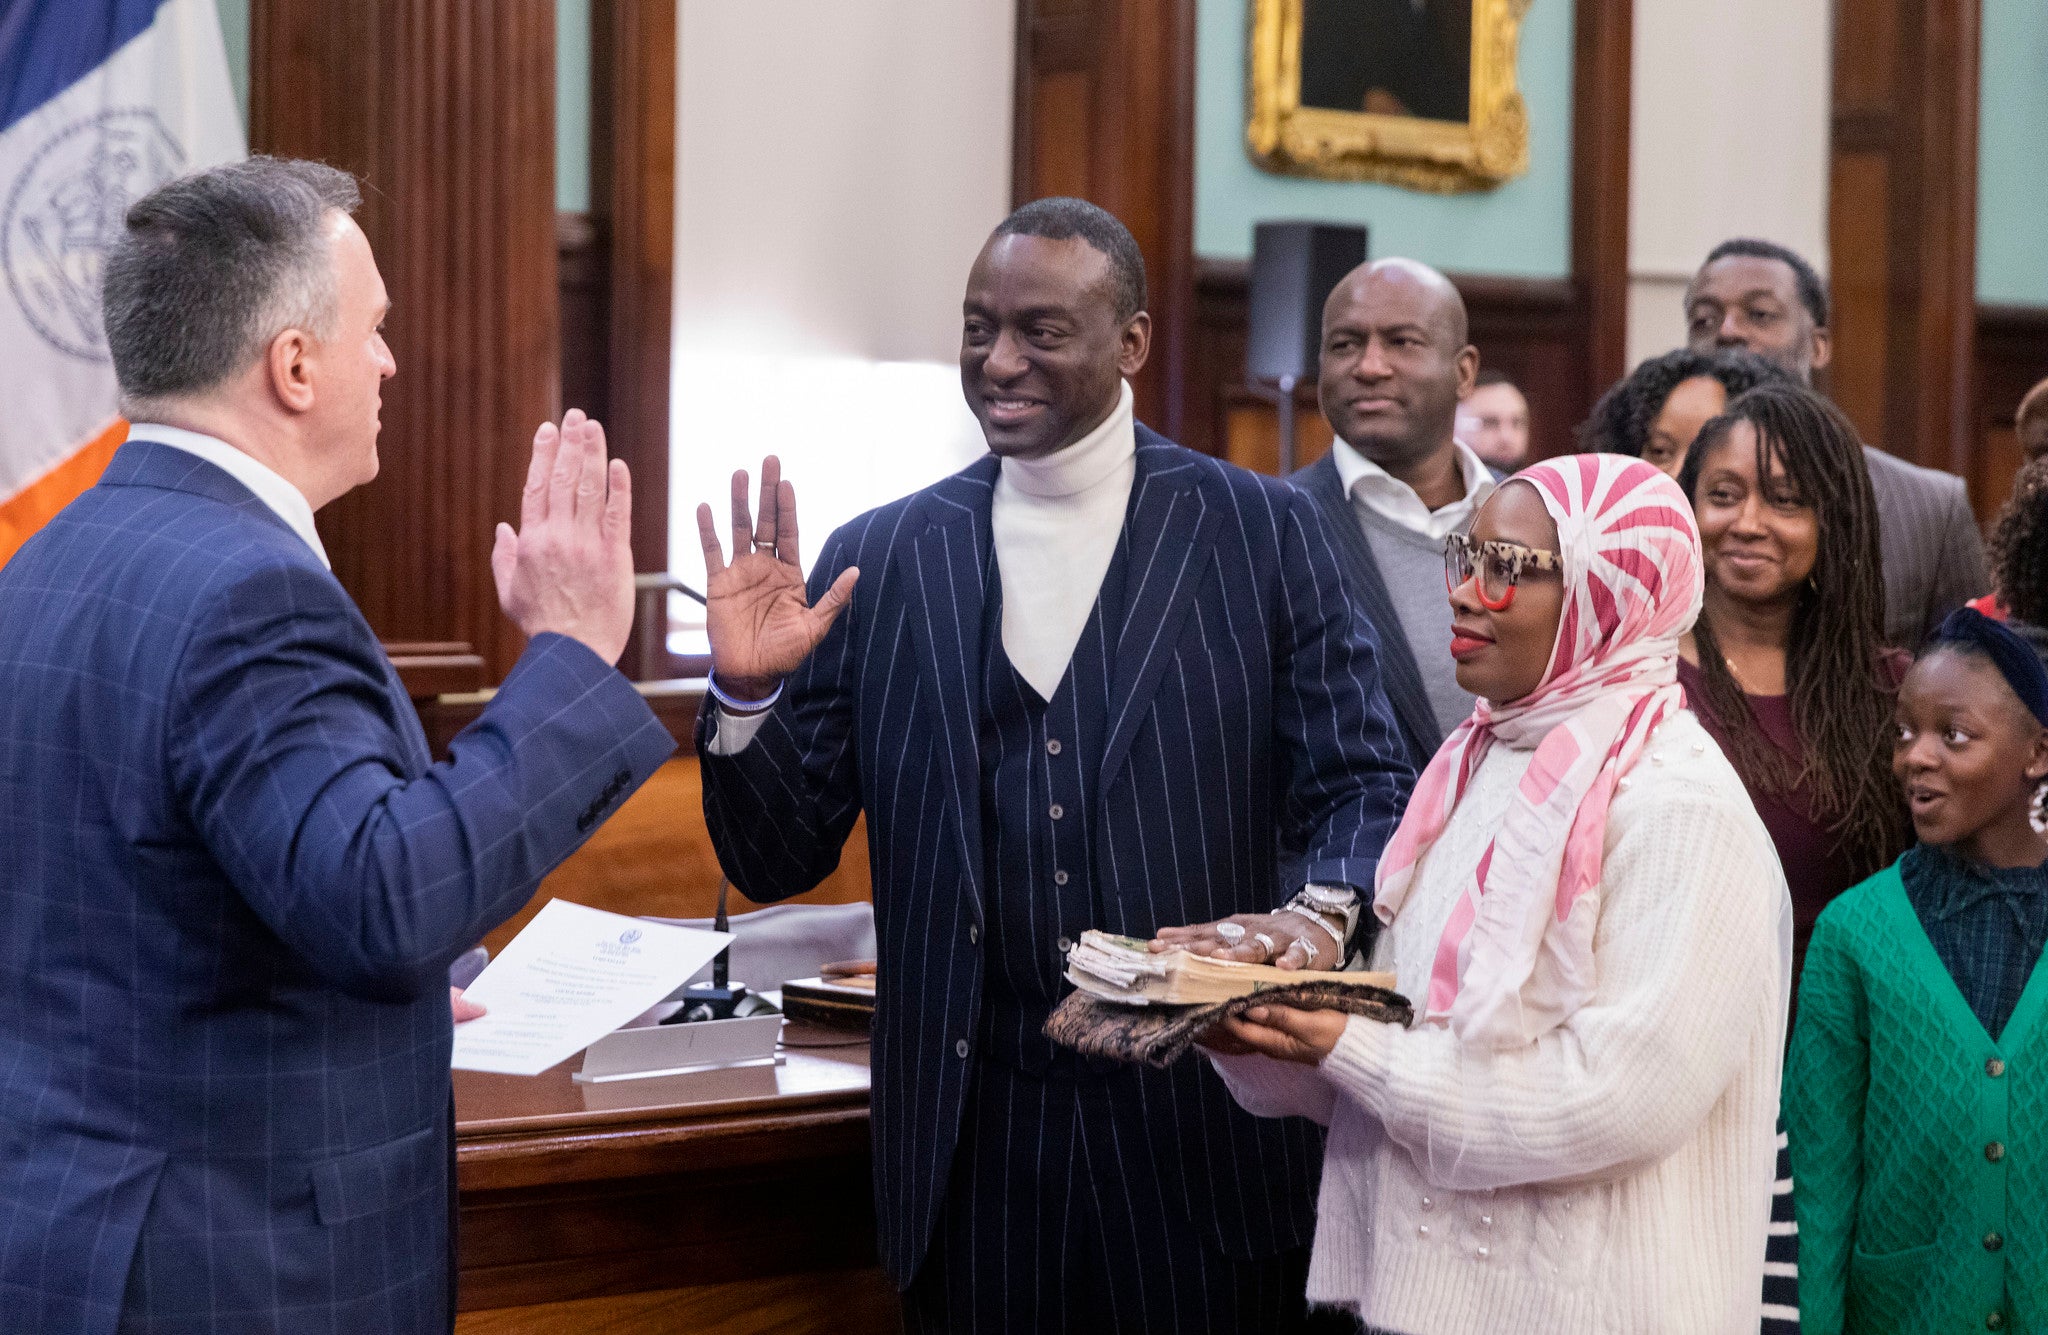 Salaam at his swearing in ceremony in December